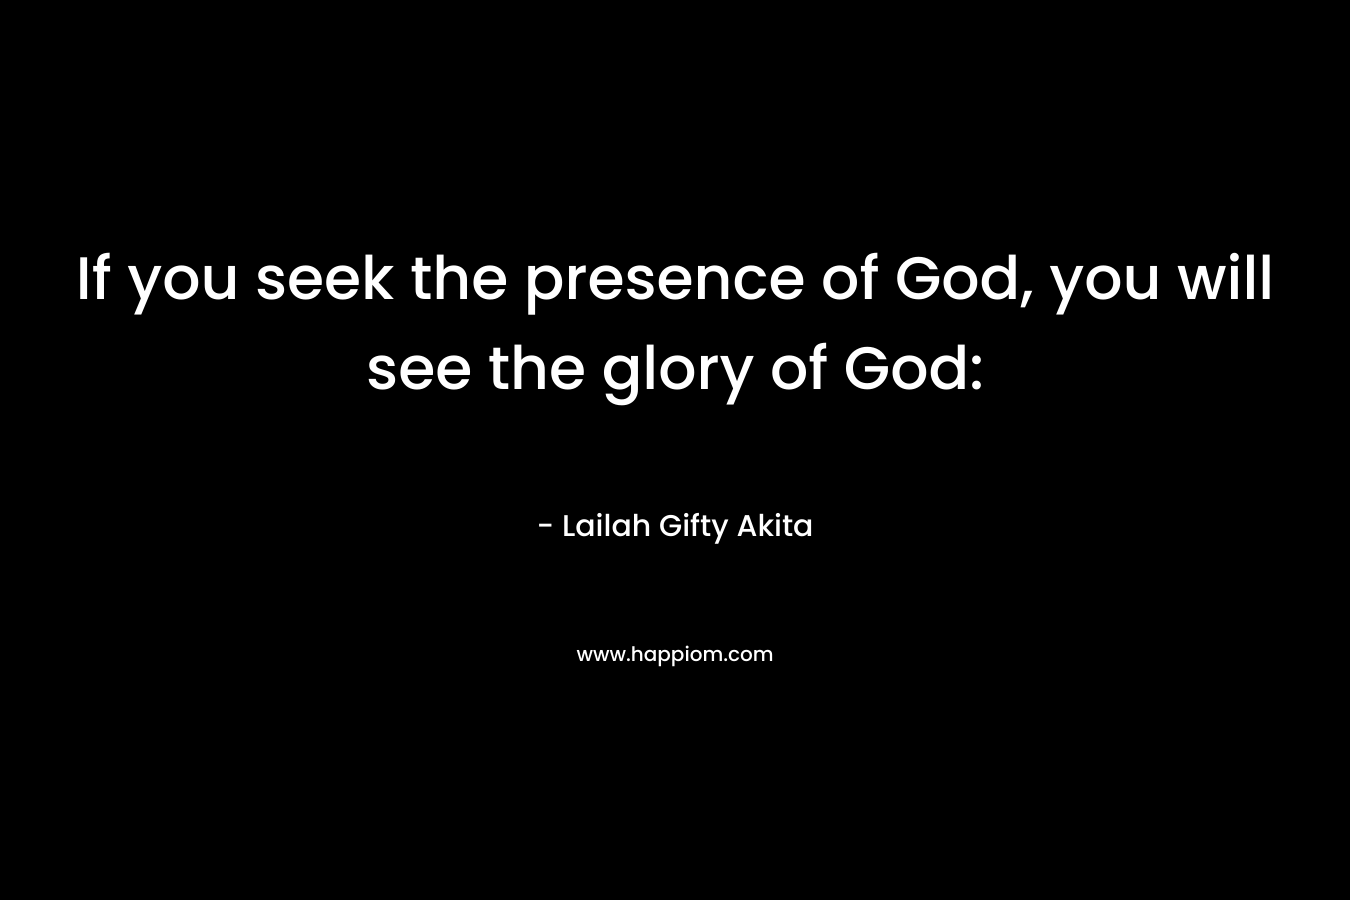 If you seek the presence of God, you will see the glory of God: